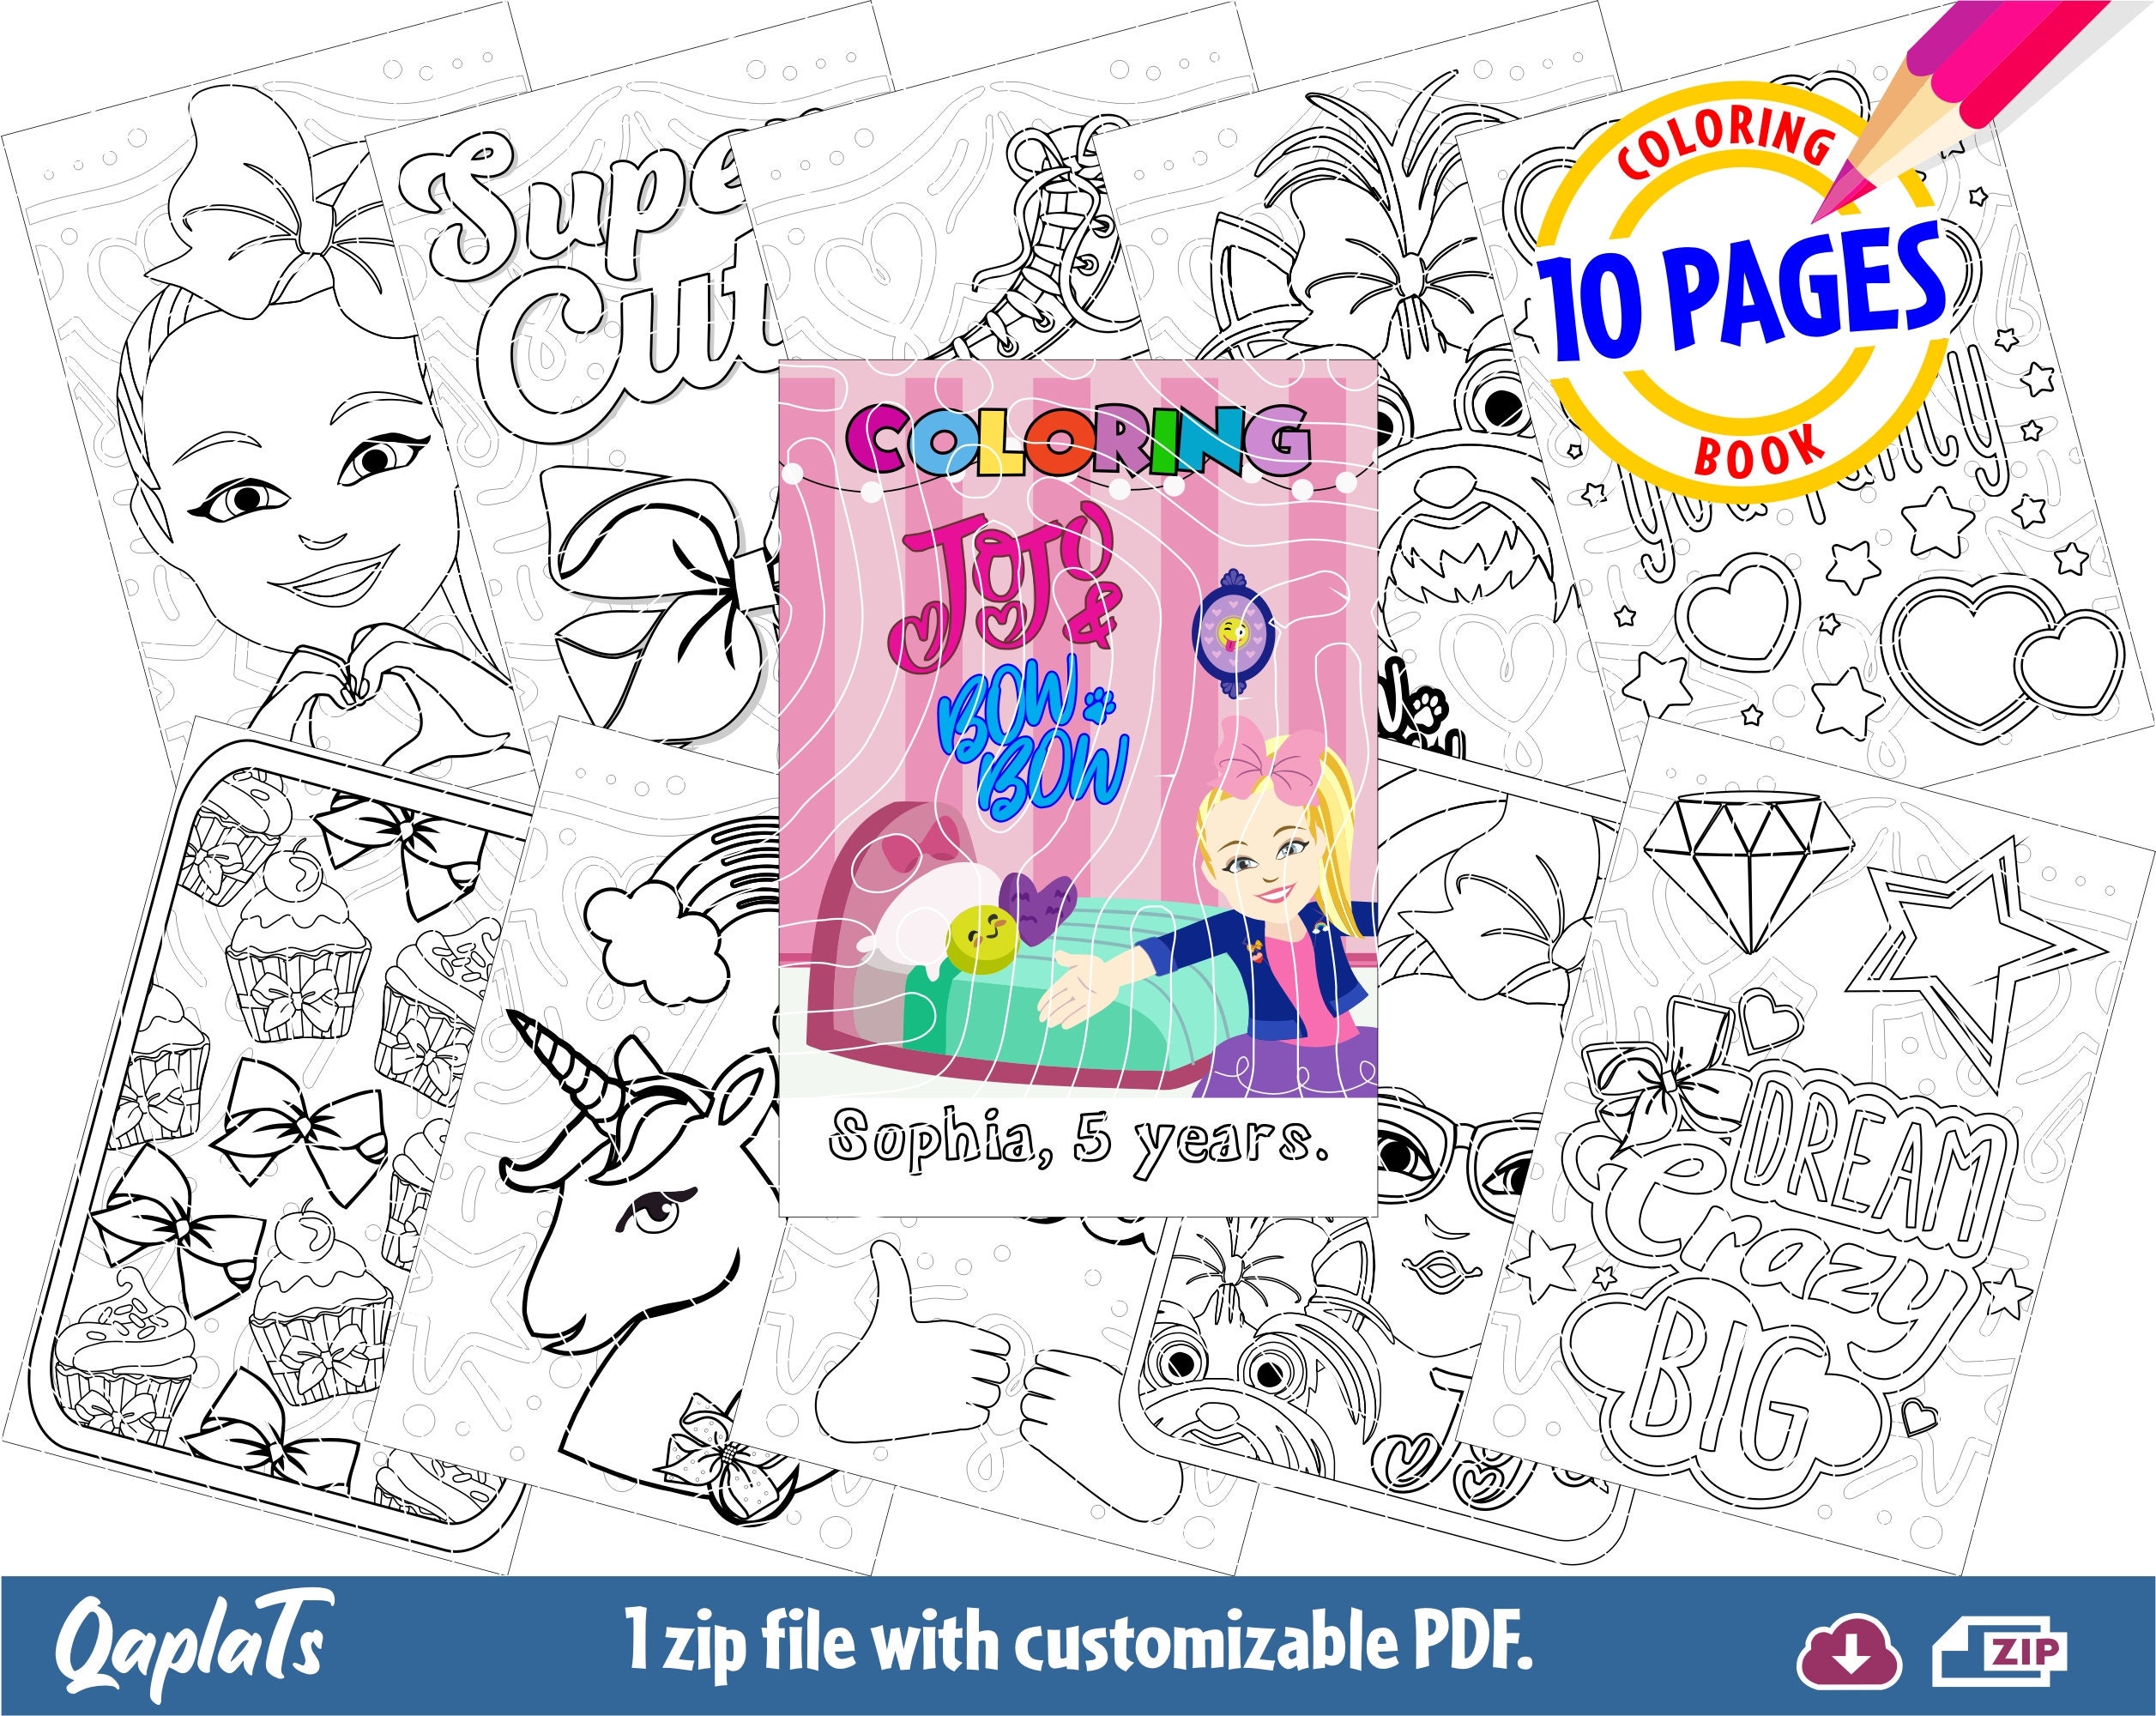 jojo siwa and bow bow inspired coloring pages is digital file etsy